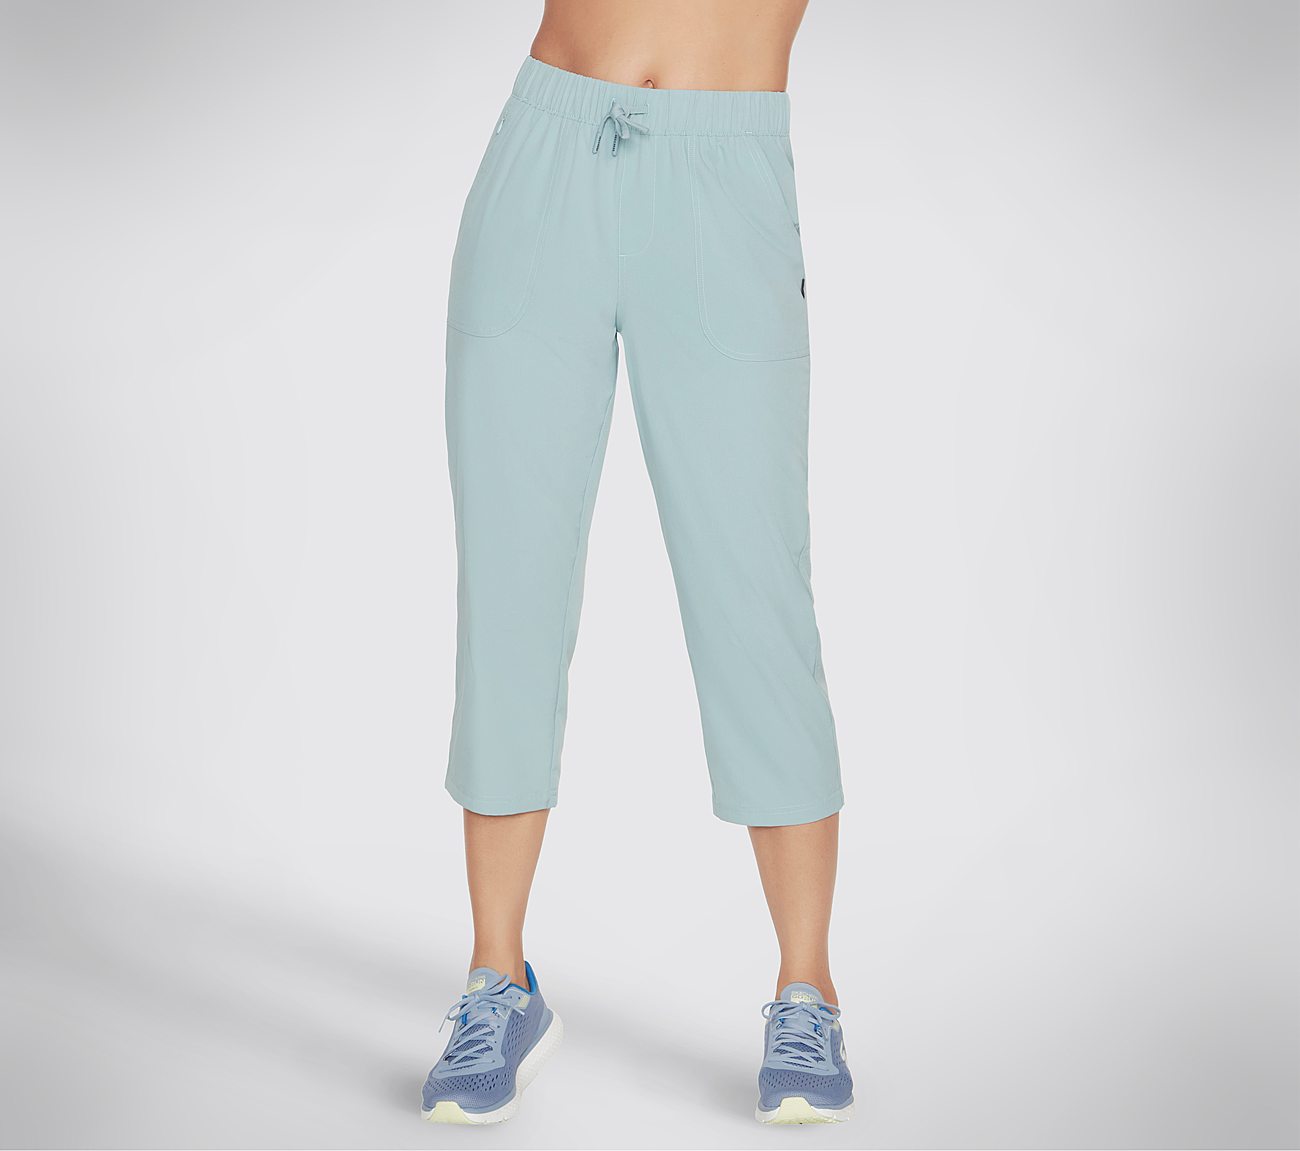 INCLINE MIDCALF PANT, LIGHT GREY/BLUE Apparels Lateral View